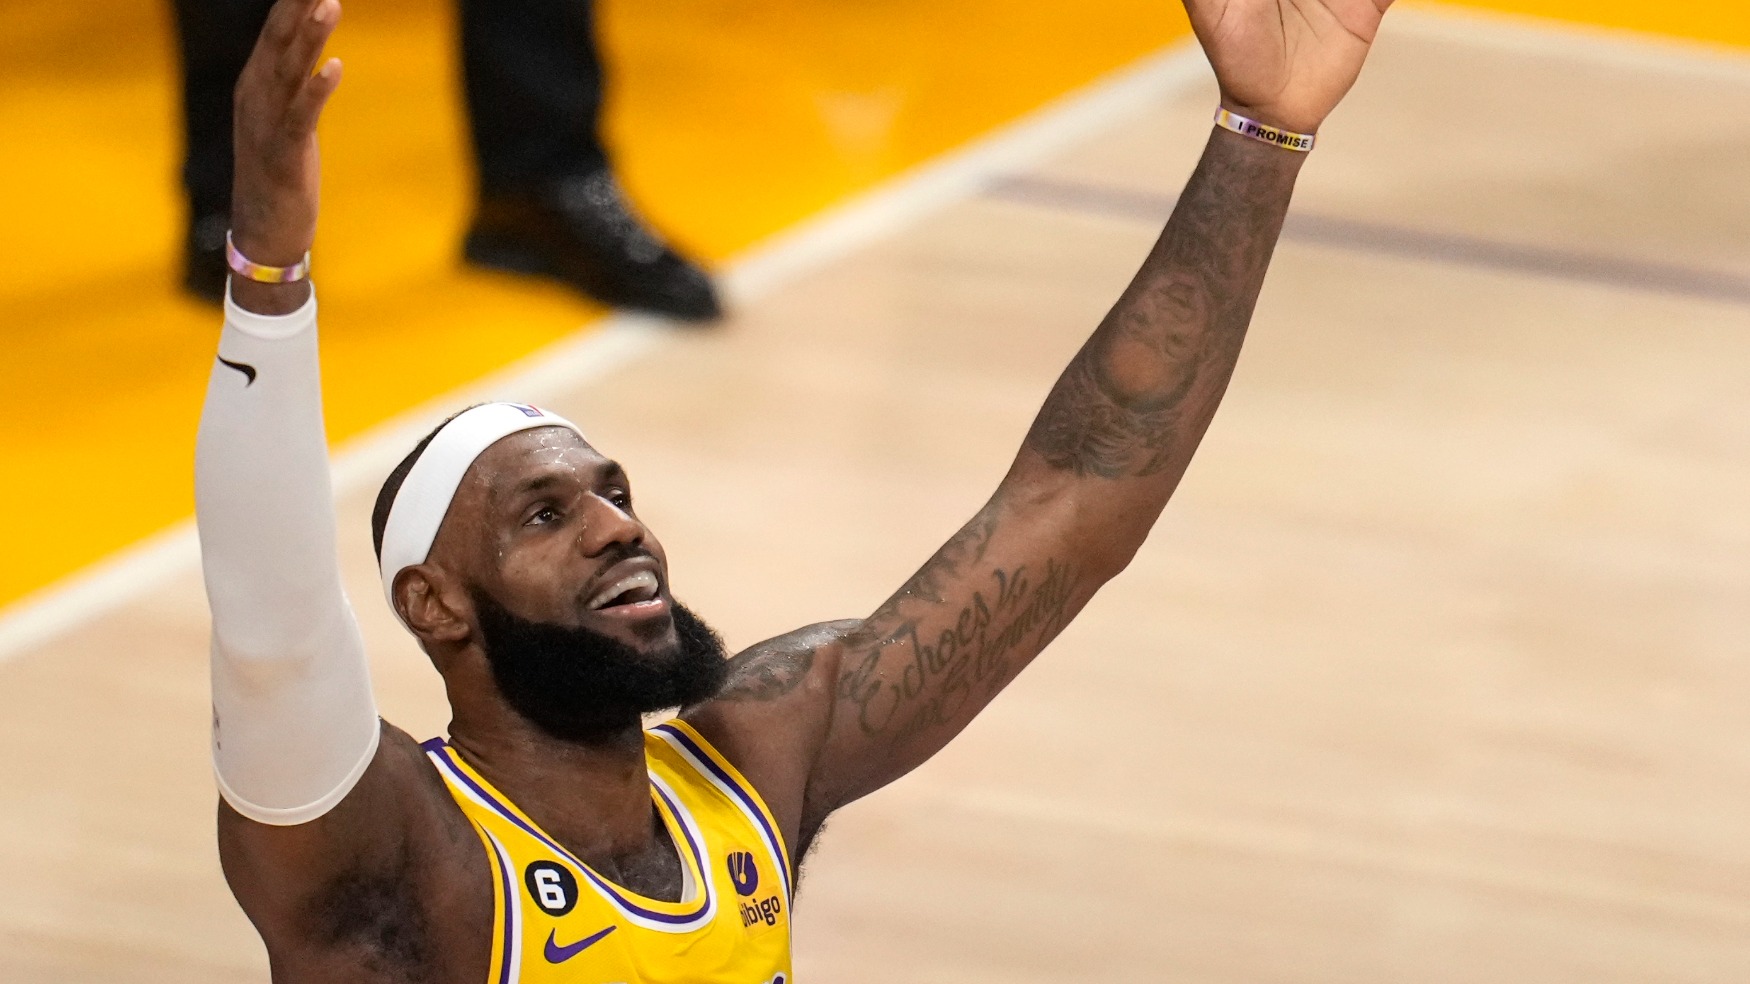 He promised: LeBron James is the AP's male athlete of 2018